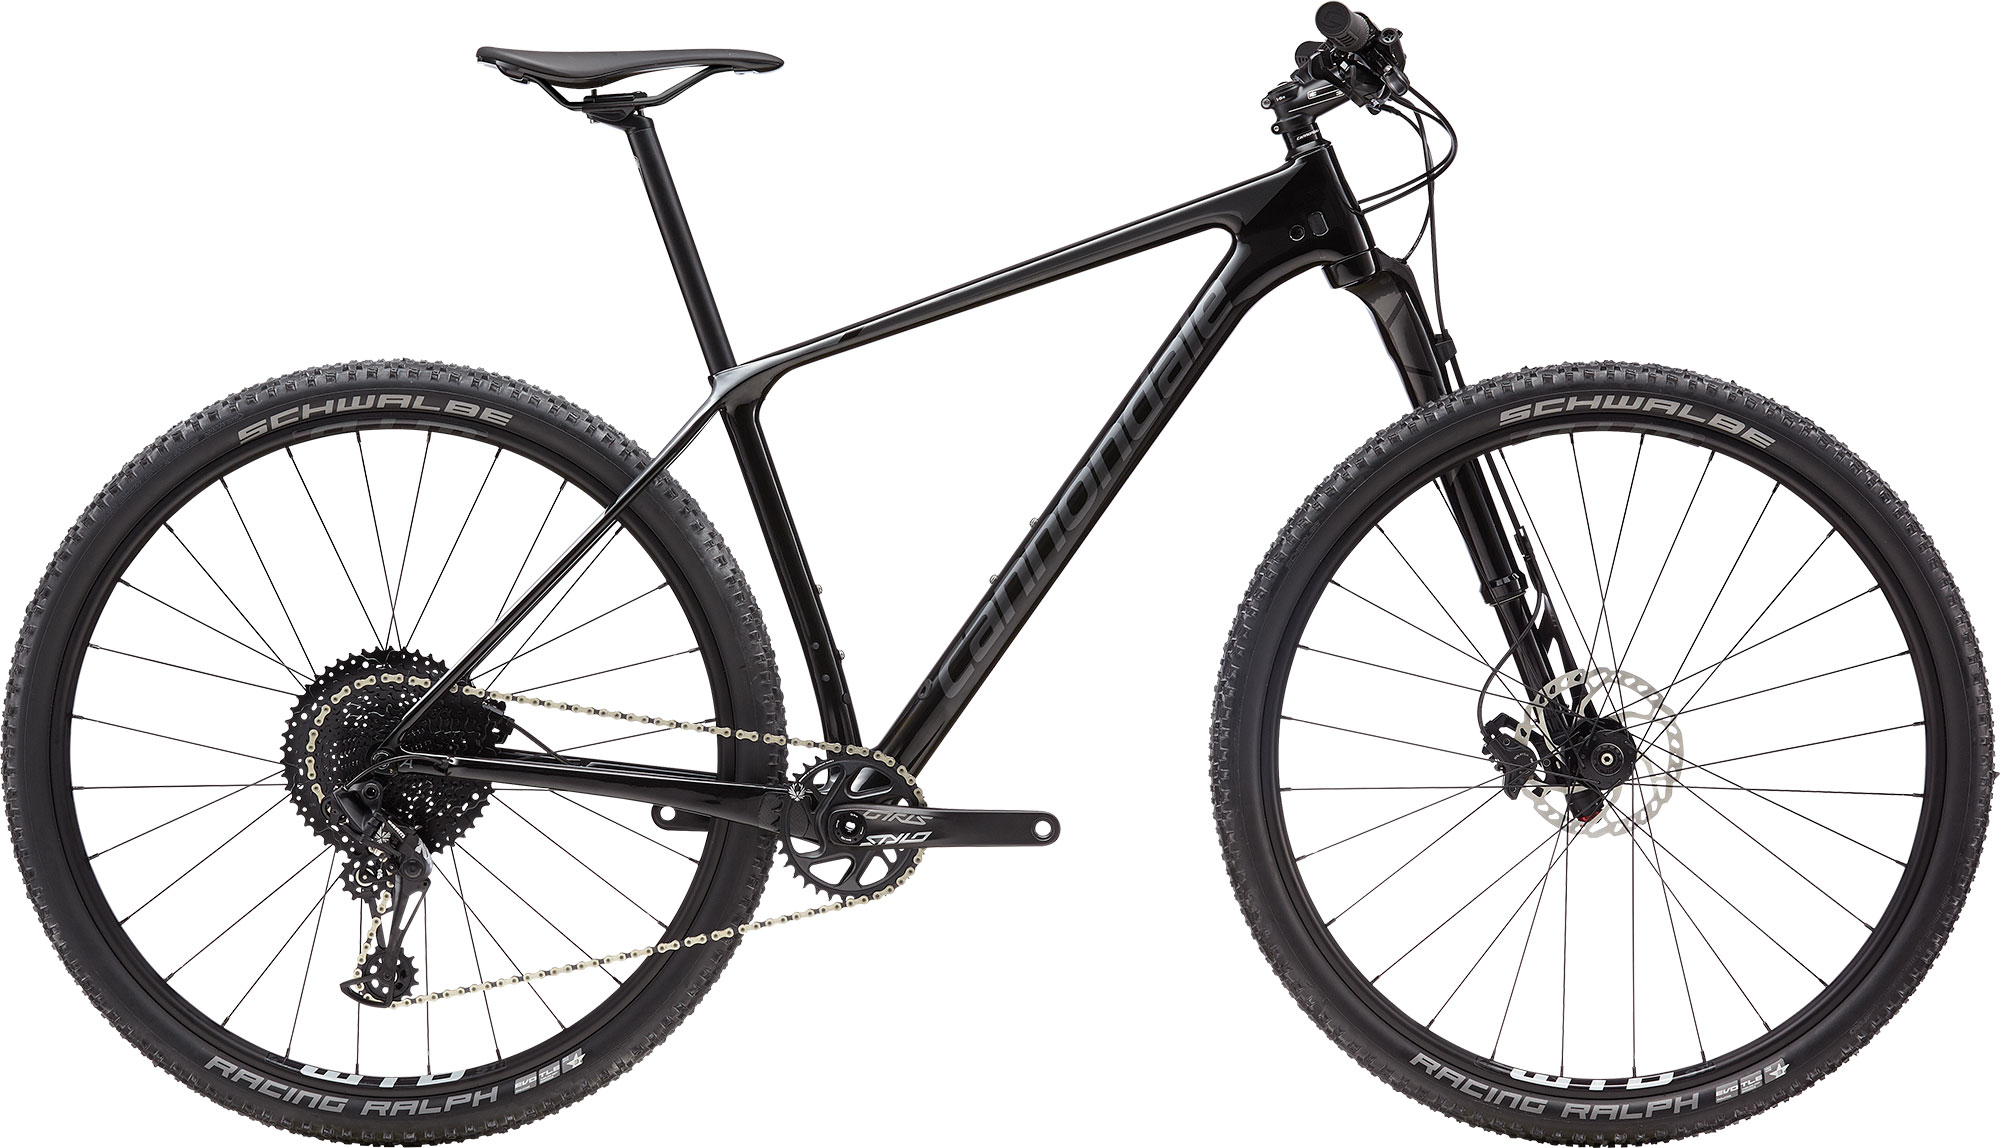 Велосипед 29" Cannondale F-SI Carbon 4 рама - XL 2019 GRY серый